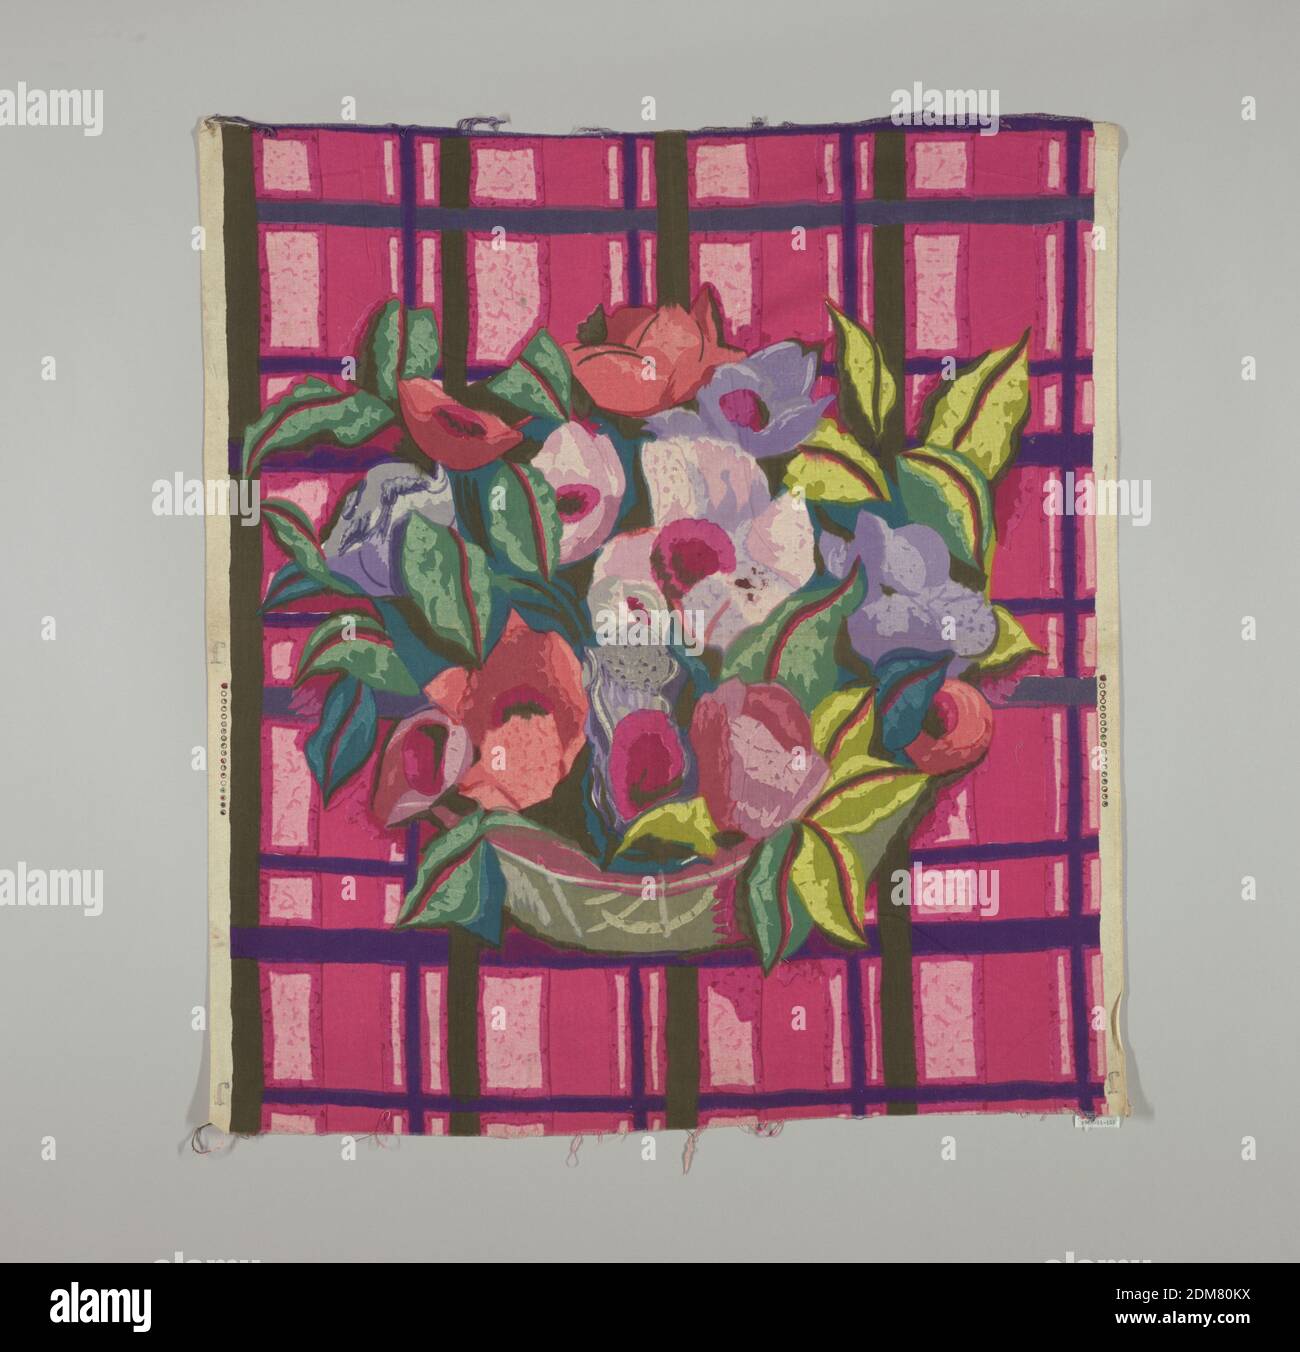 Textile, Medium: cotton Technique: block printed, Multicolored block print of a grey-green bowl with large red, pink and lavender flowers with leaves in two shades of green. Bowl is placed on a plaid-like ground of deep pink, dark purple, and black., England or USA, 1920–1930, printed, dyed & painted textiles, Textile Stock Photo